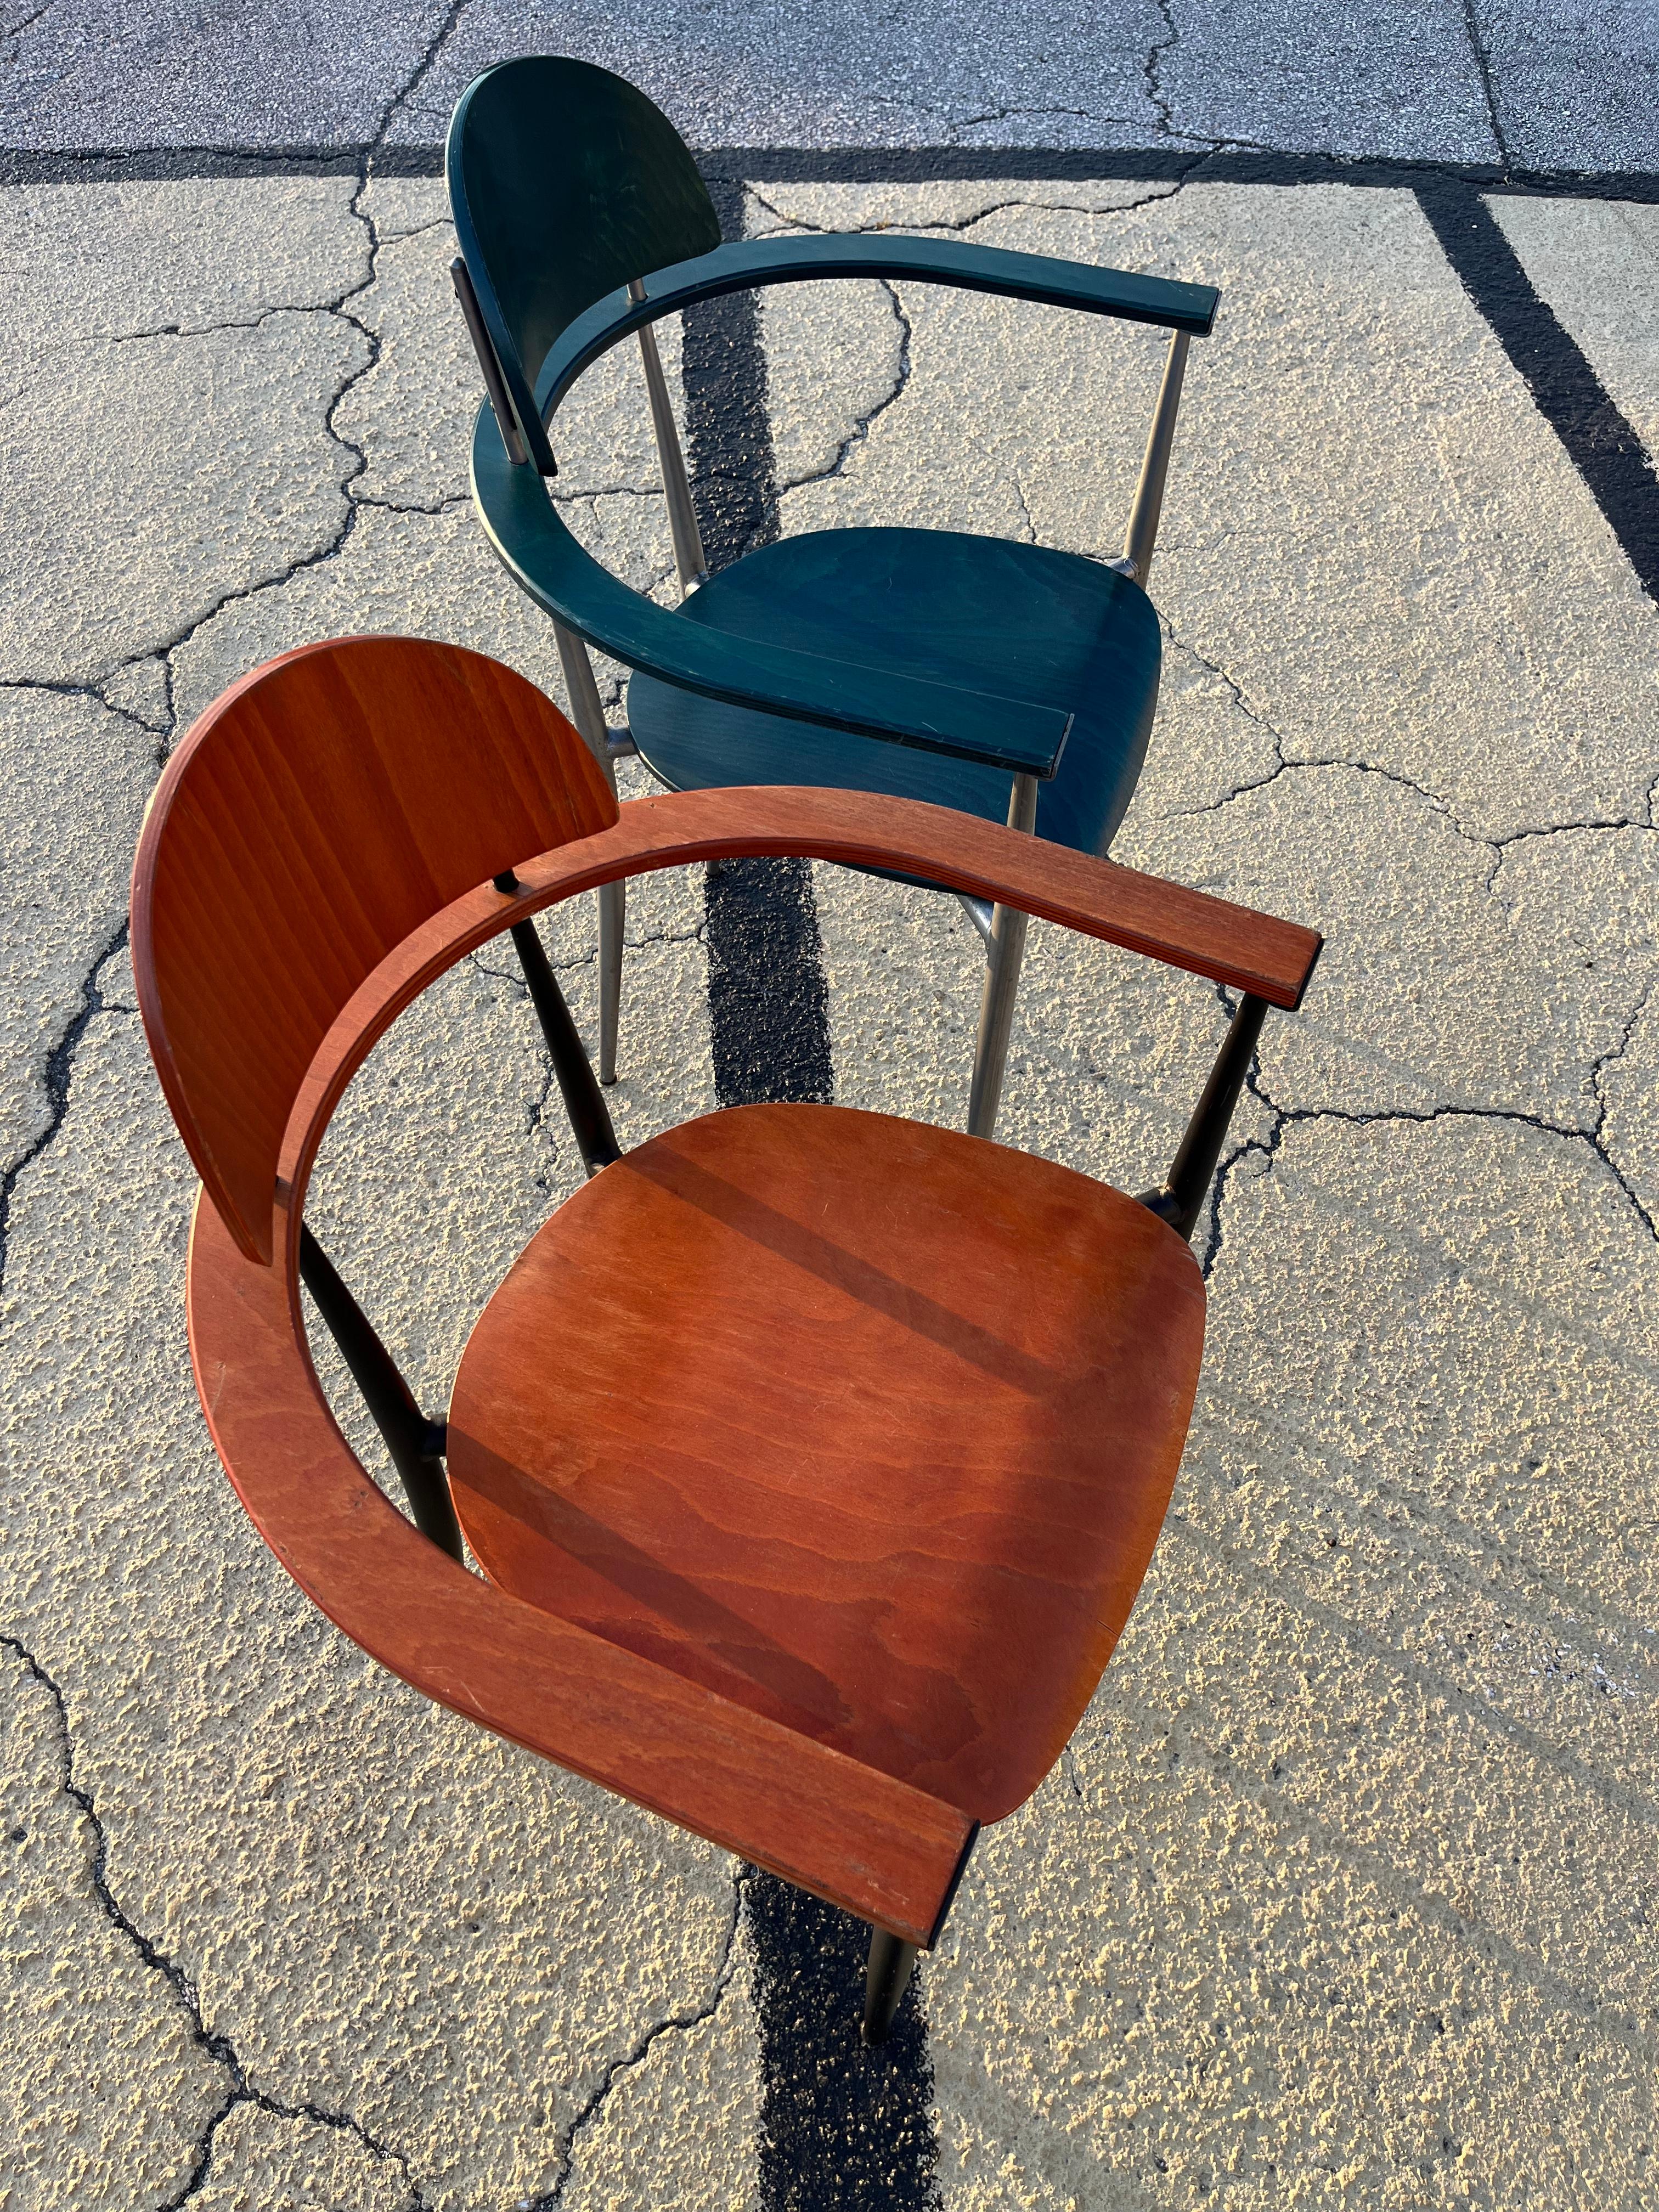 A Pair of Postmodern Accent Chairs in the Arrben Stiletto Chairs. Circa 1980s For Sale 4